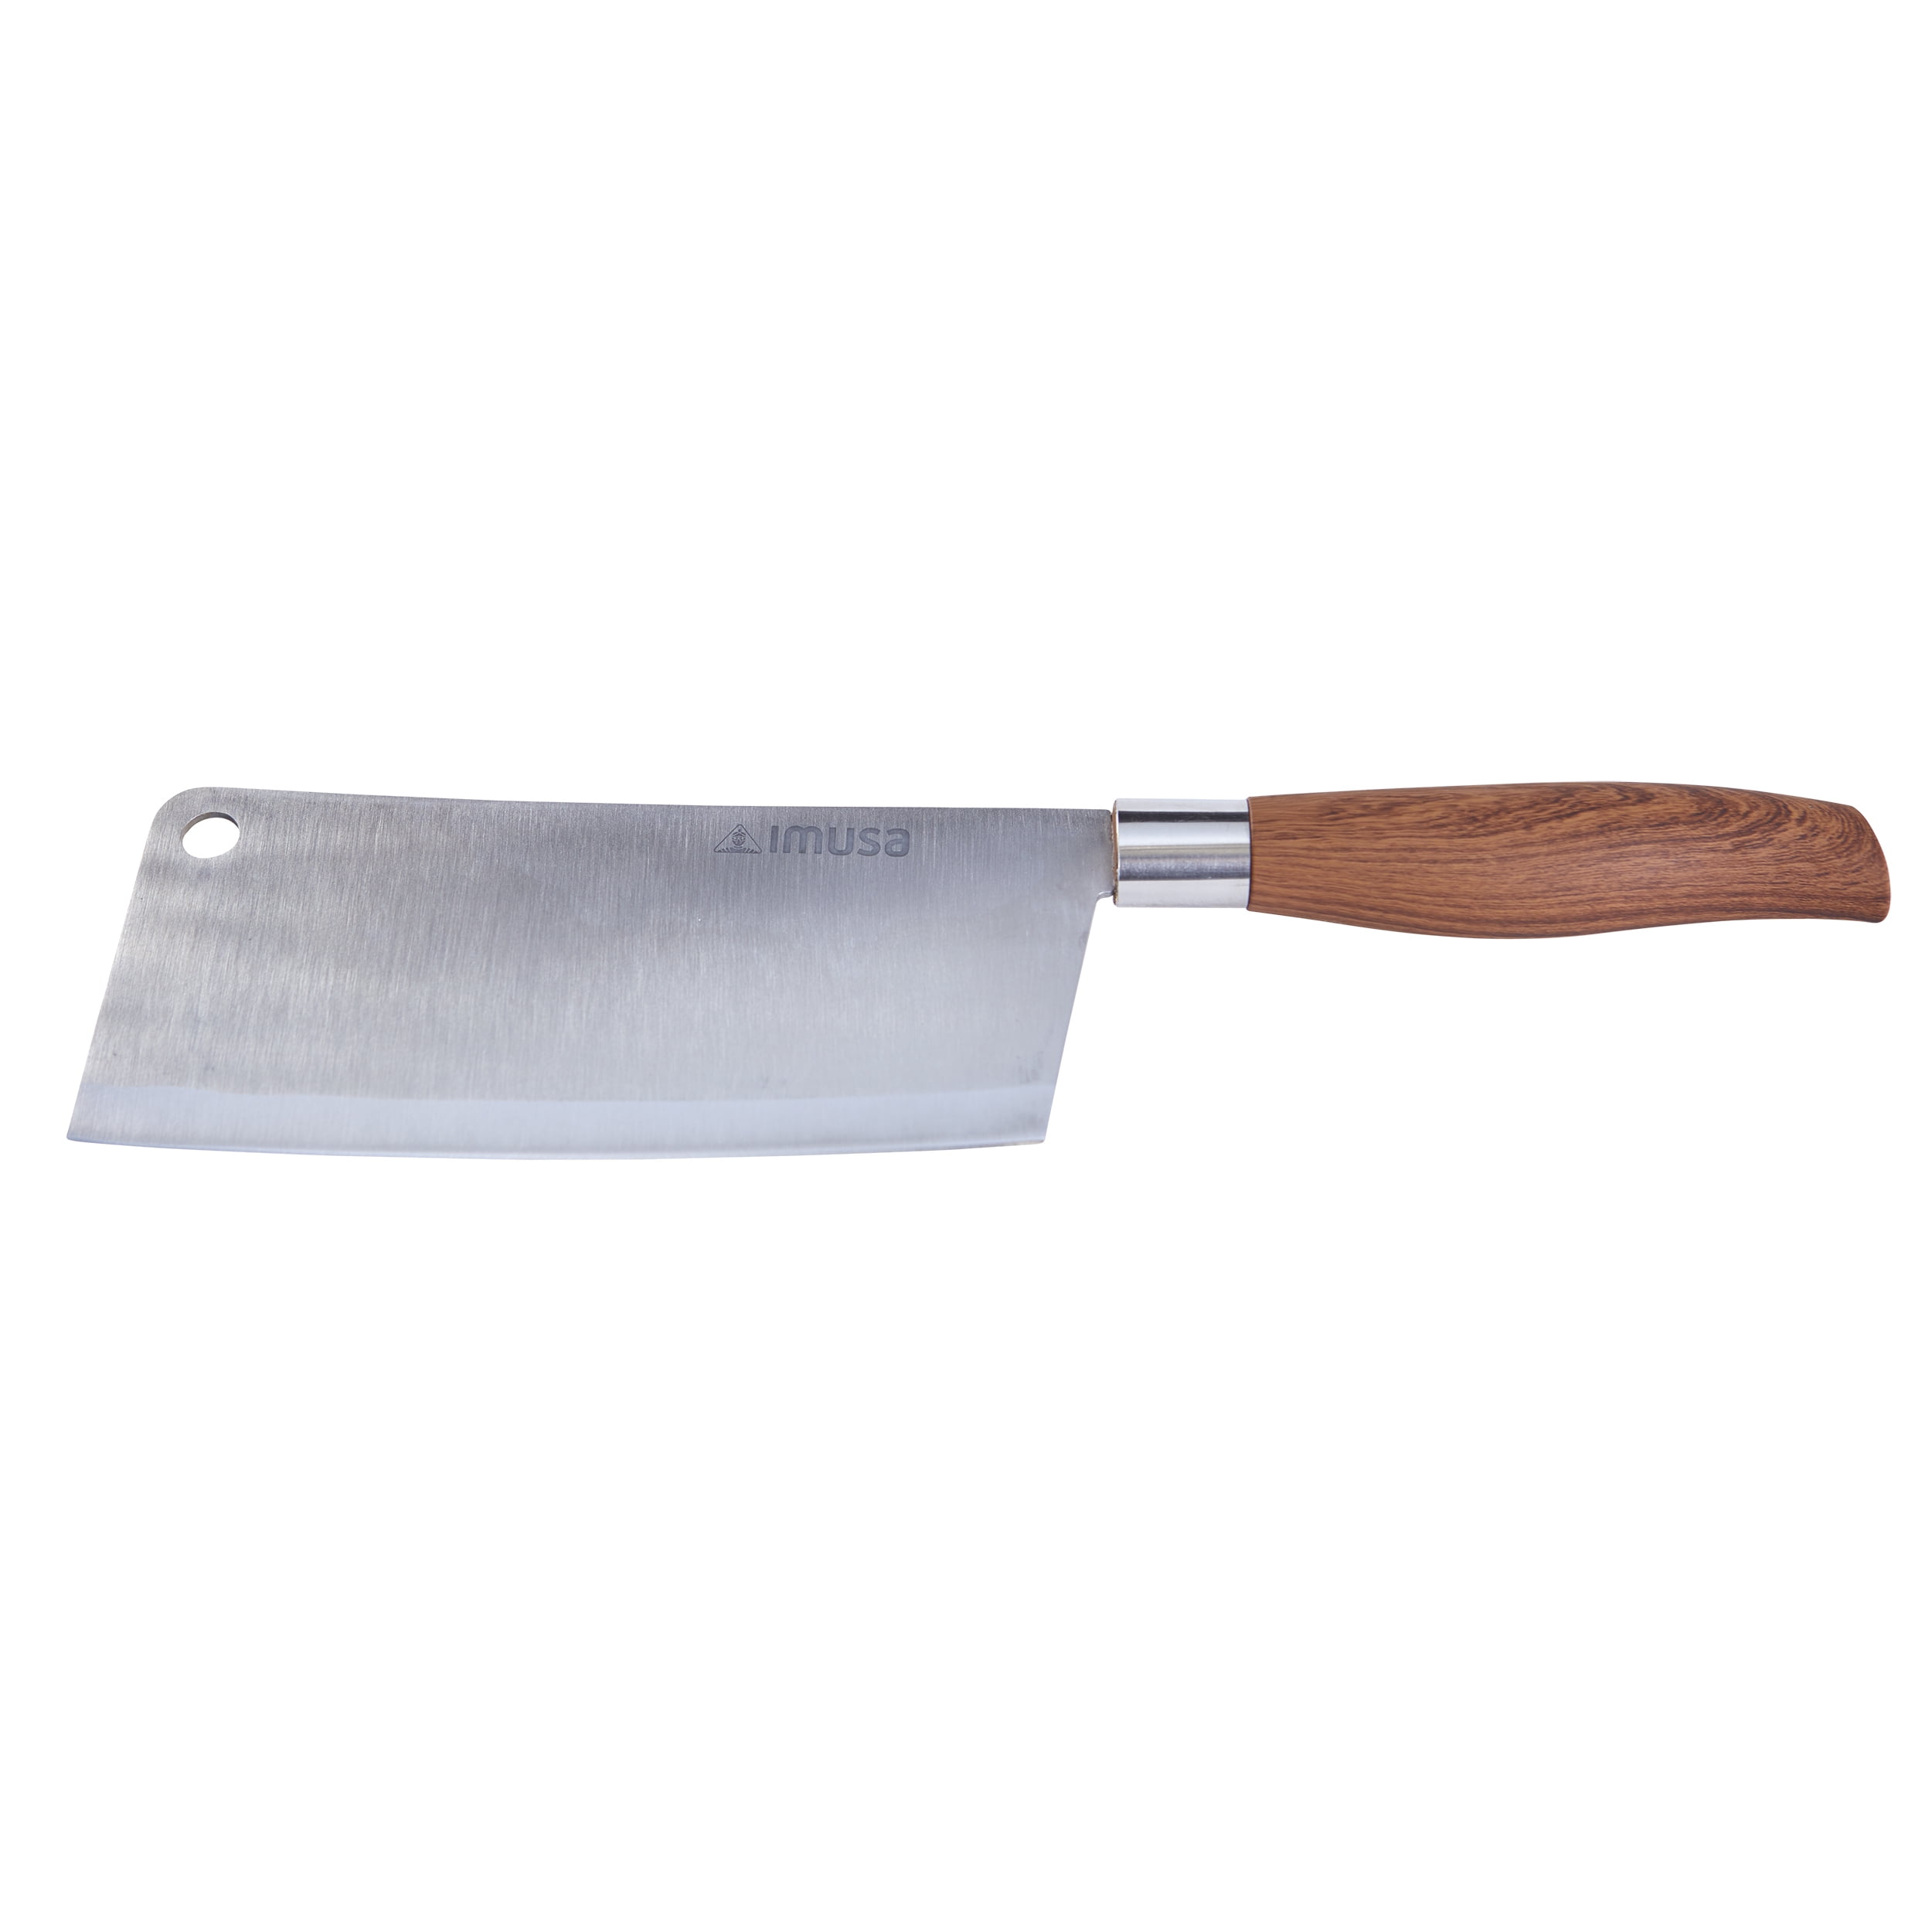 Imusa 5 5 Inch Stainless Steel Kitchen Cleaver With Woodlook Handle